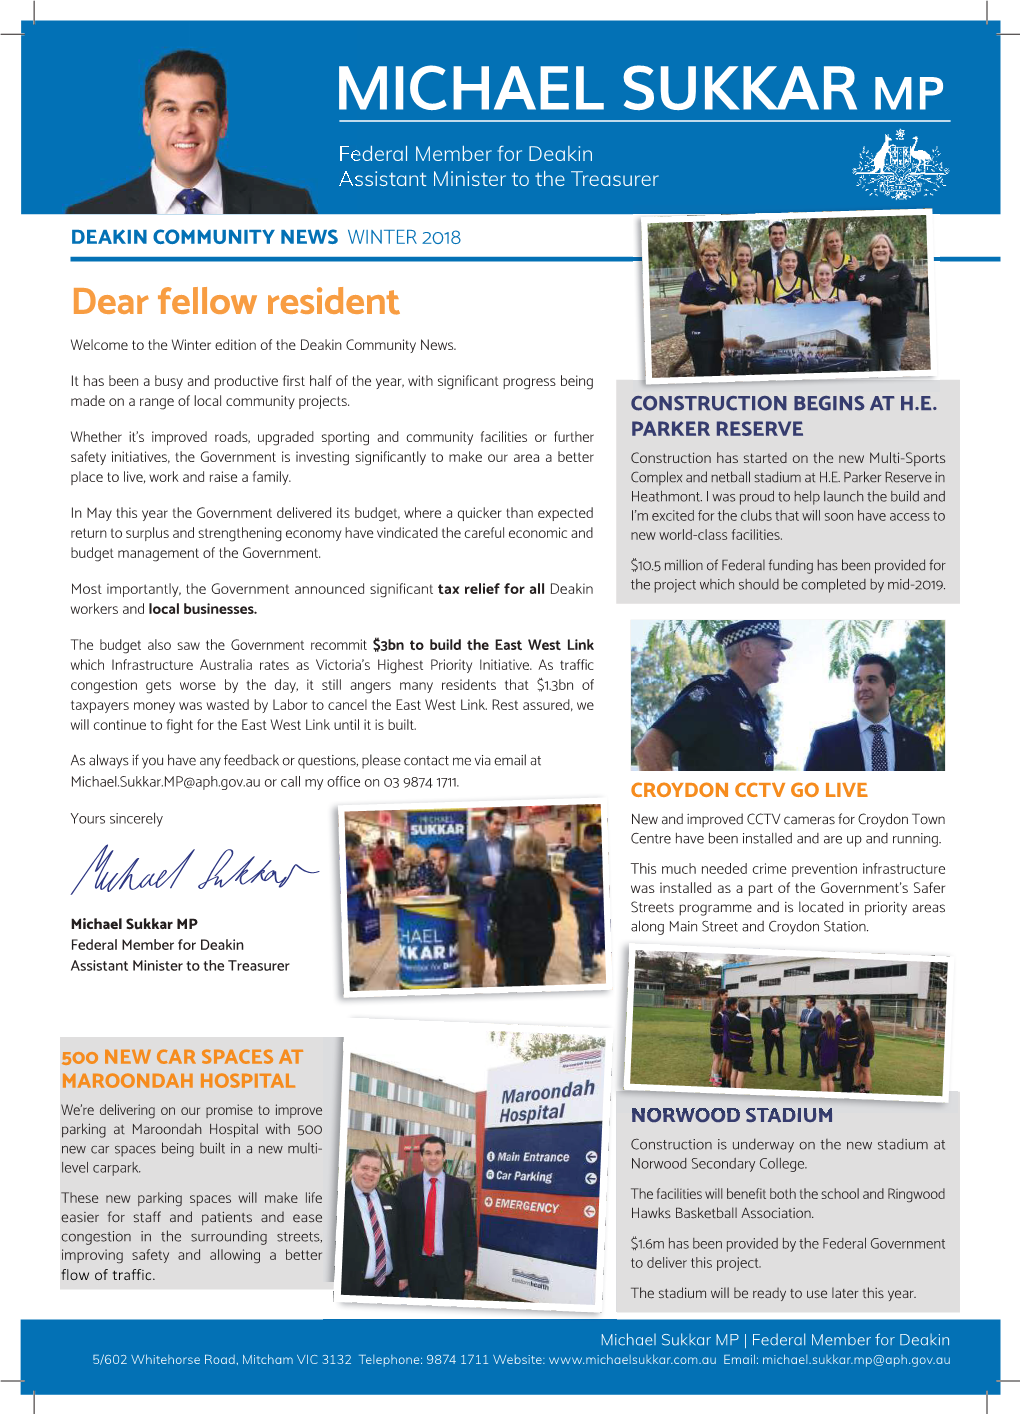 Dear Fellow Resident Welcome to the Winter Edition of the Deakin Community News